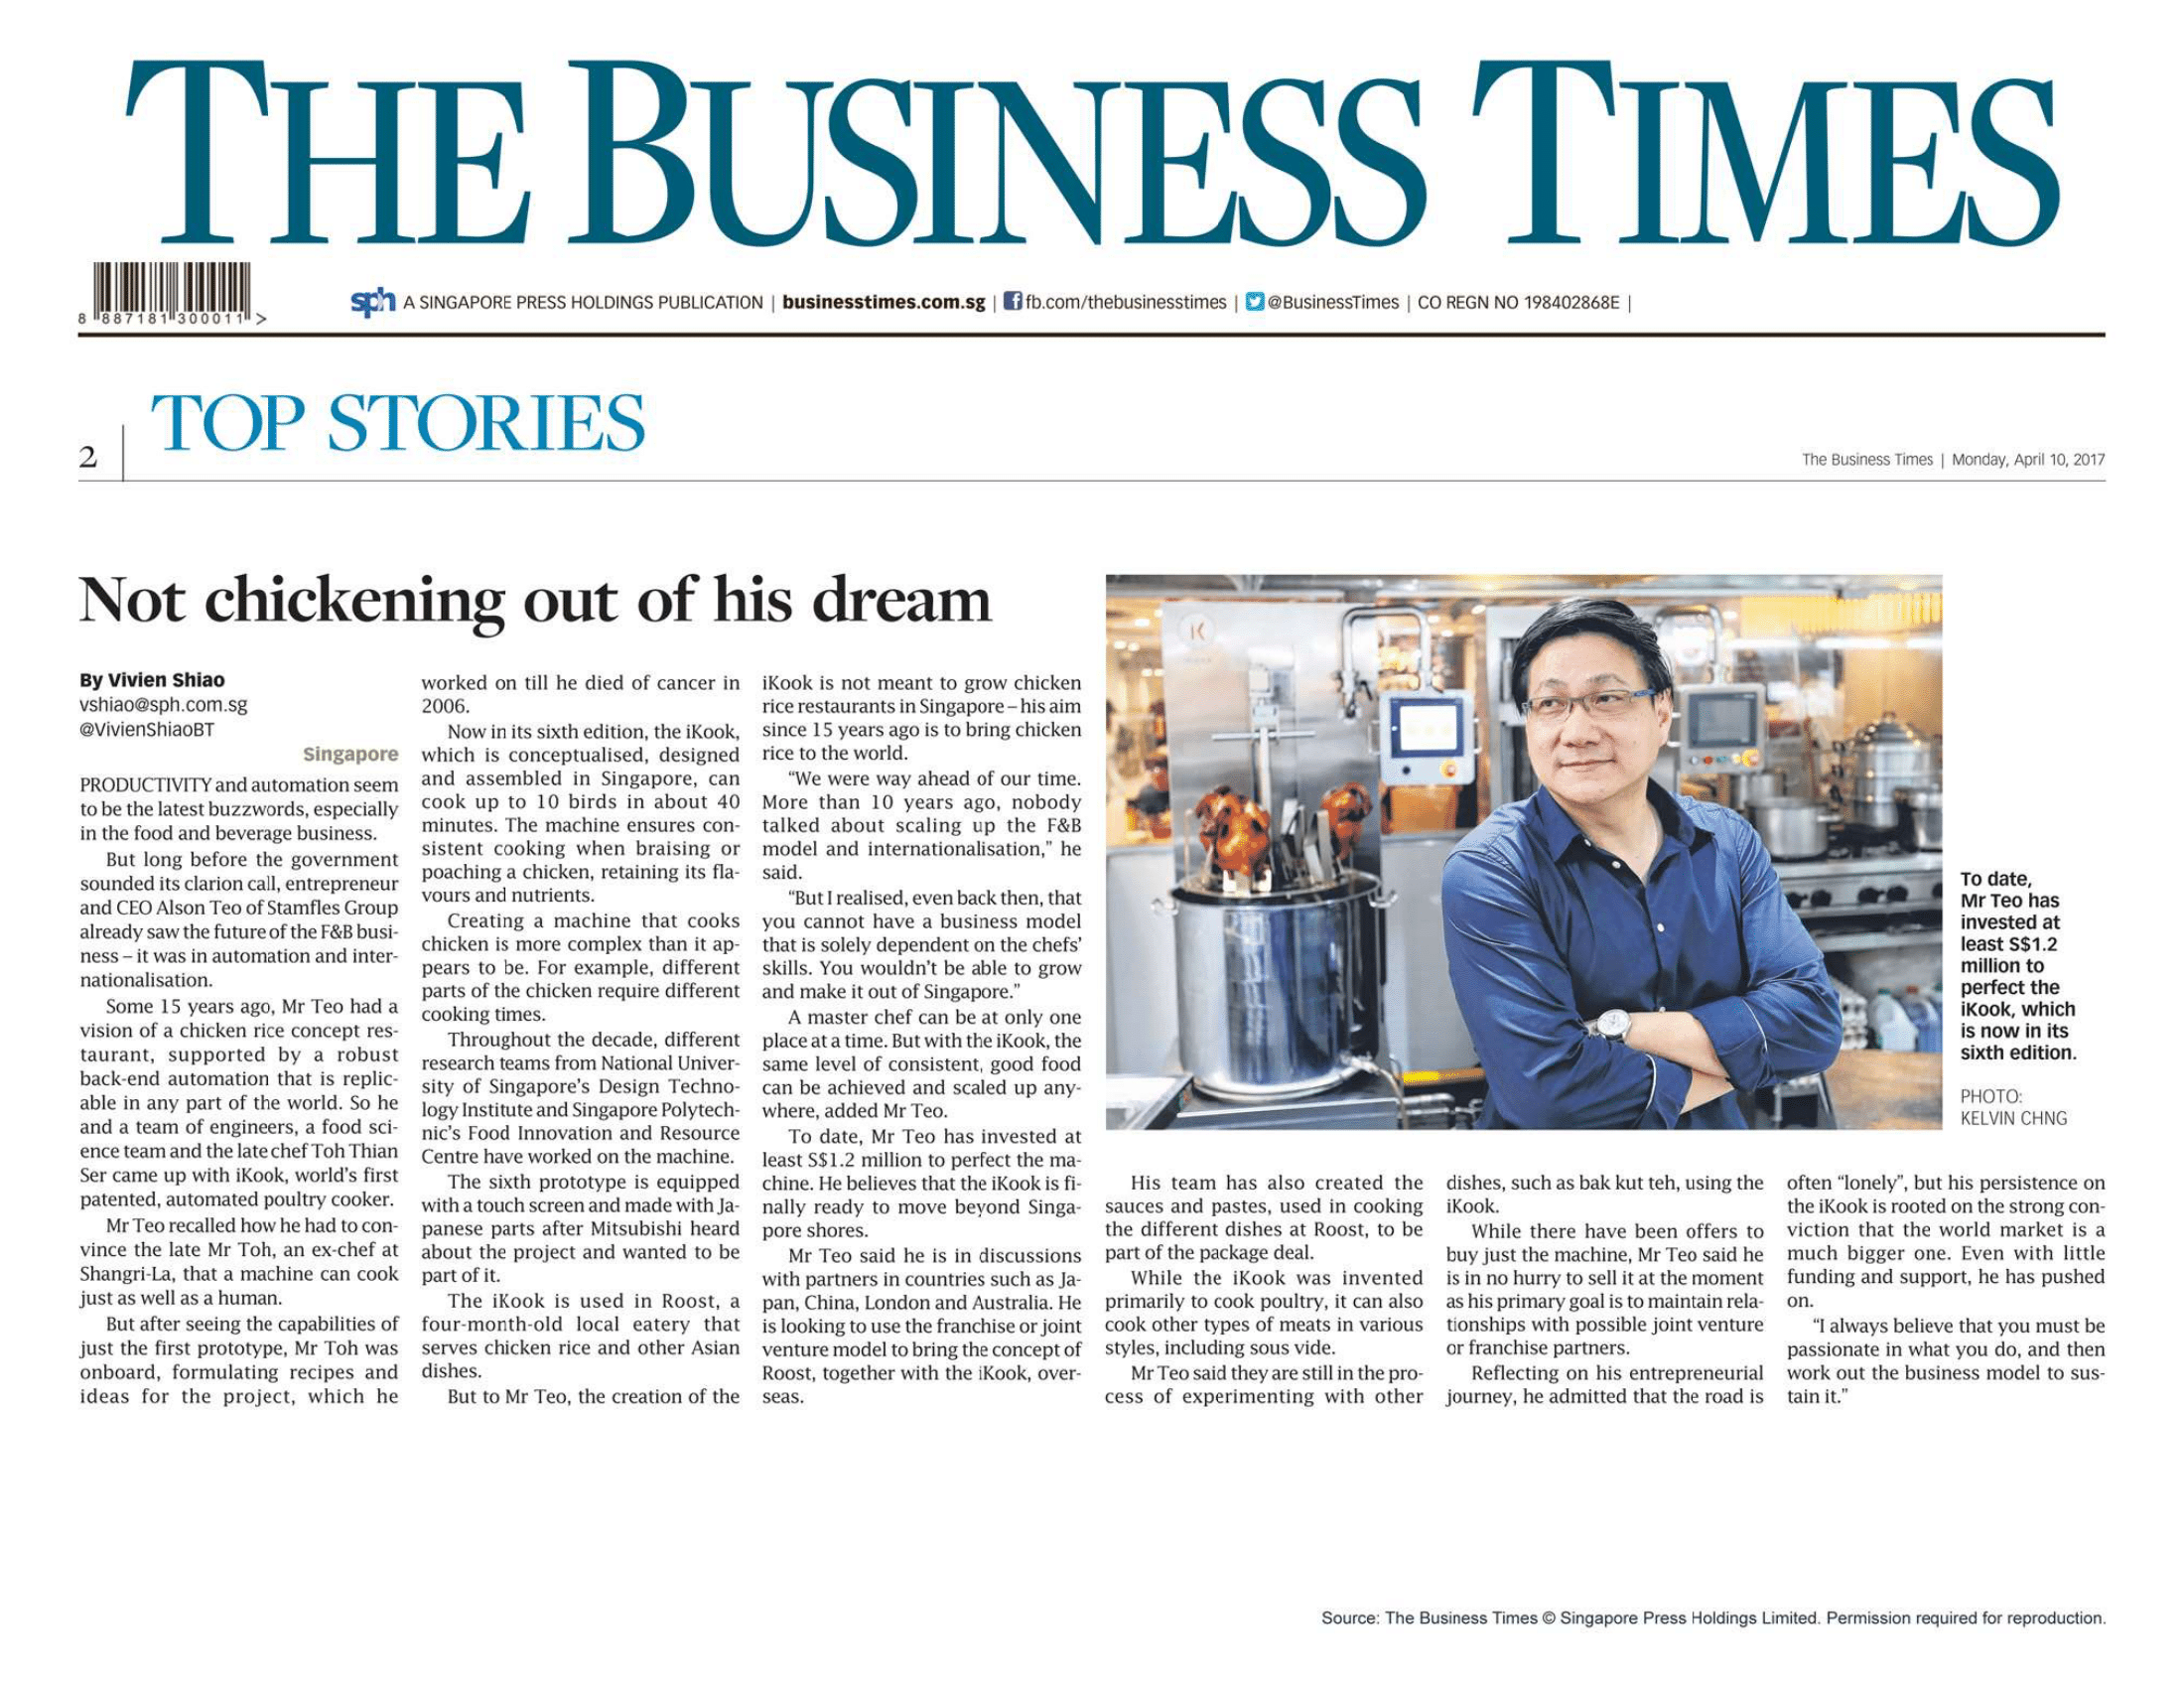 business times not chickening out of his dream